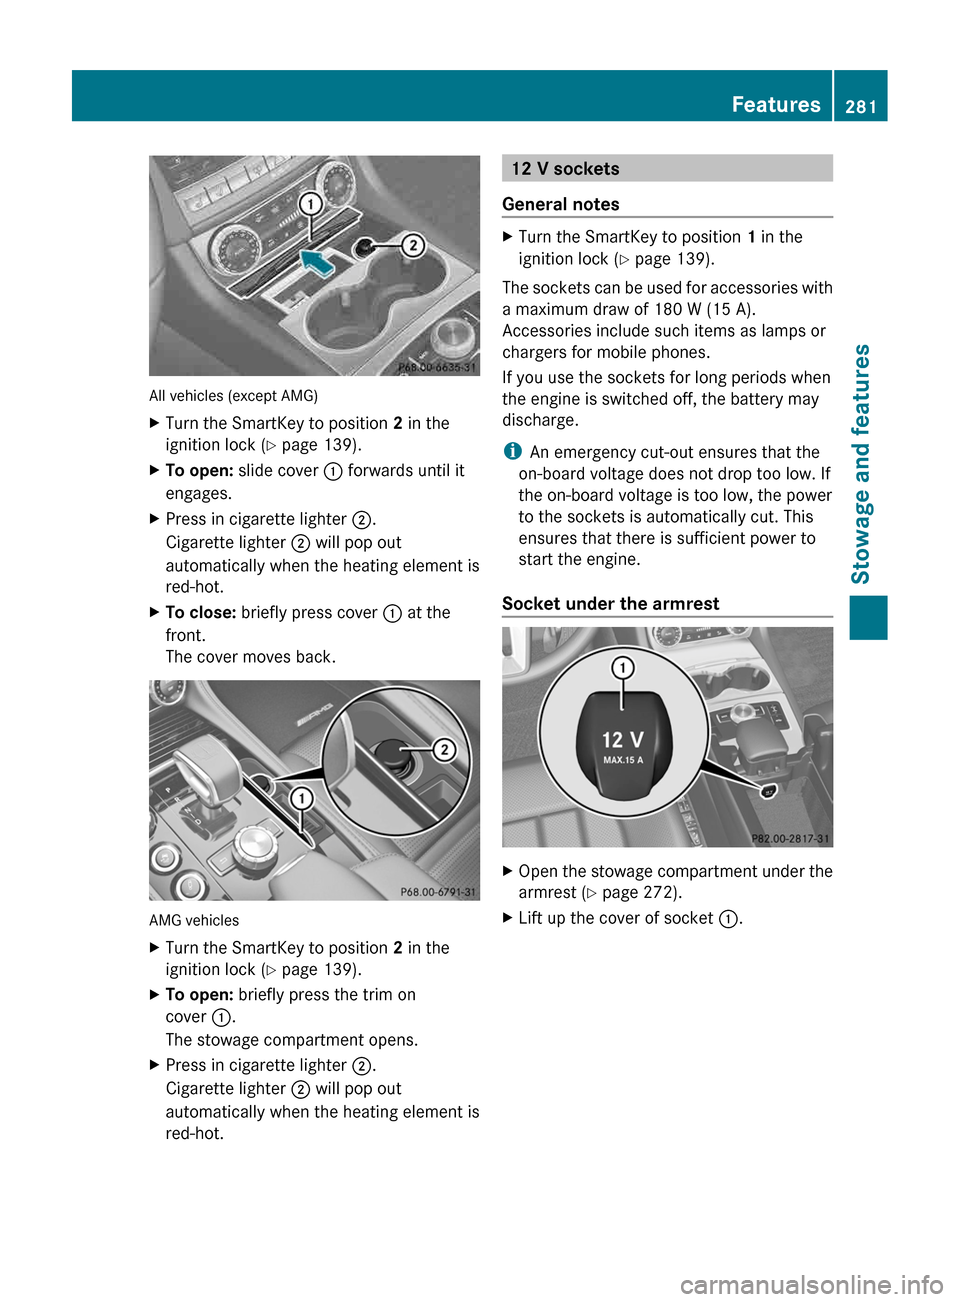 MERCEDES-BENZ CLS-Class 2013 W218 Owners Manual All vehicles (except AMG)
X
Turn the SmartKey to position  2 in the
ignition lock ( Y page 139).
X To open: slide cover  : forwards until it
engages.
X Press in cigarette lighter ;.
Cigarette lighter 